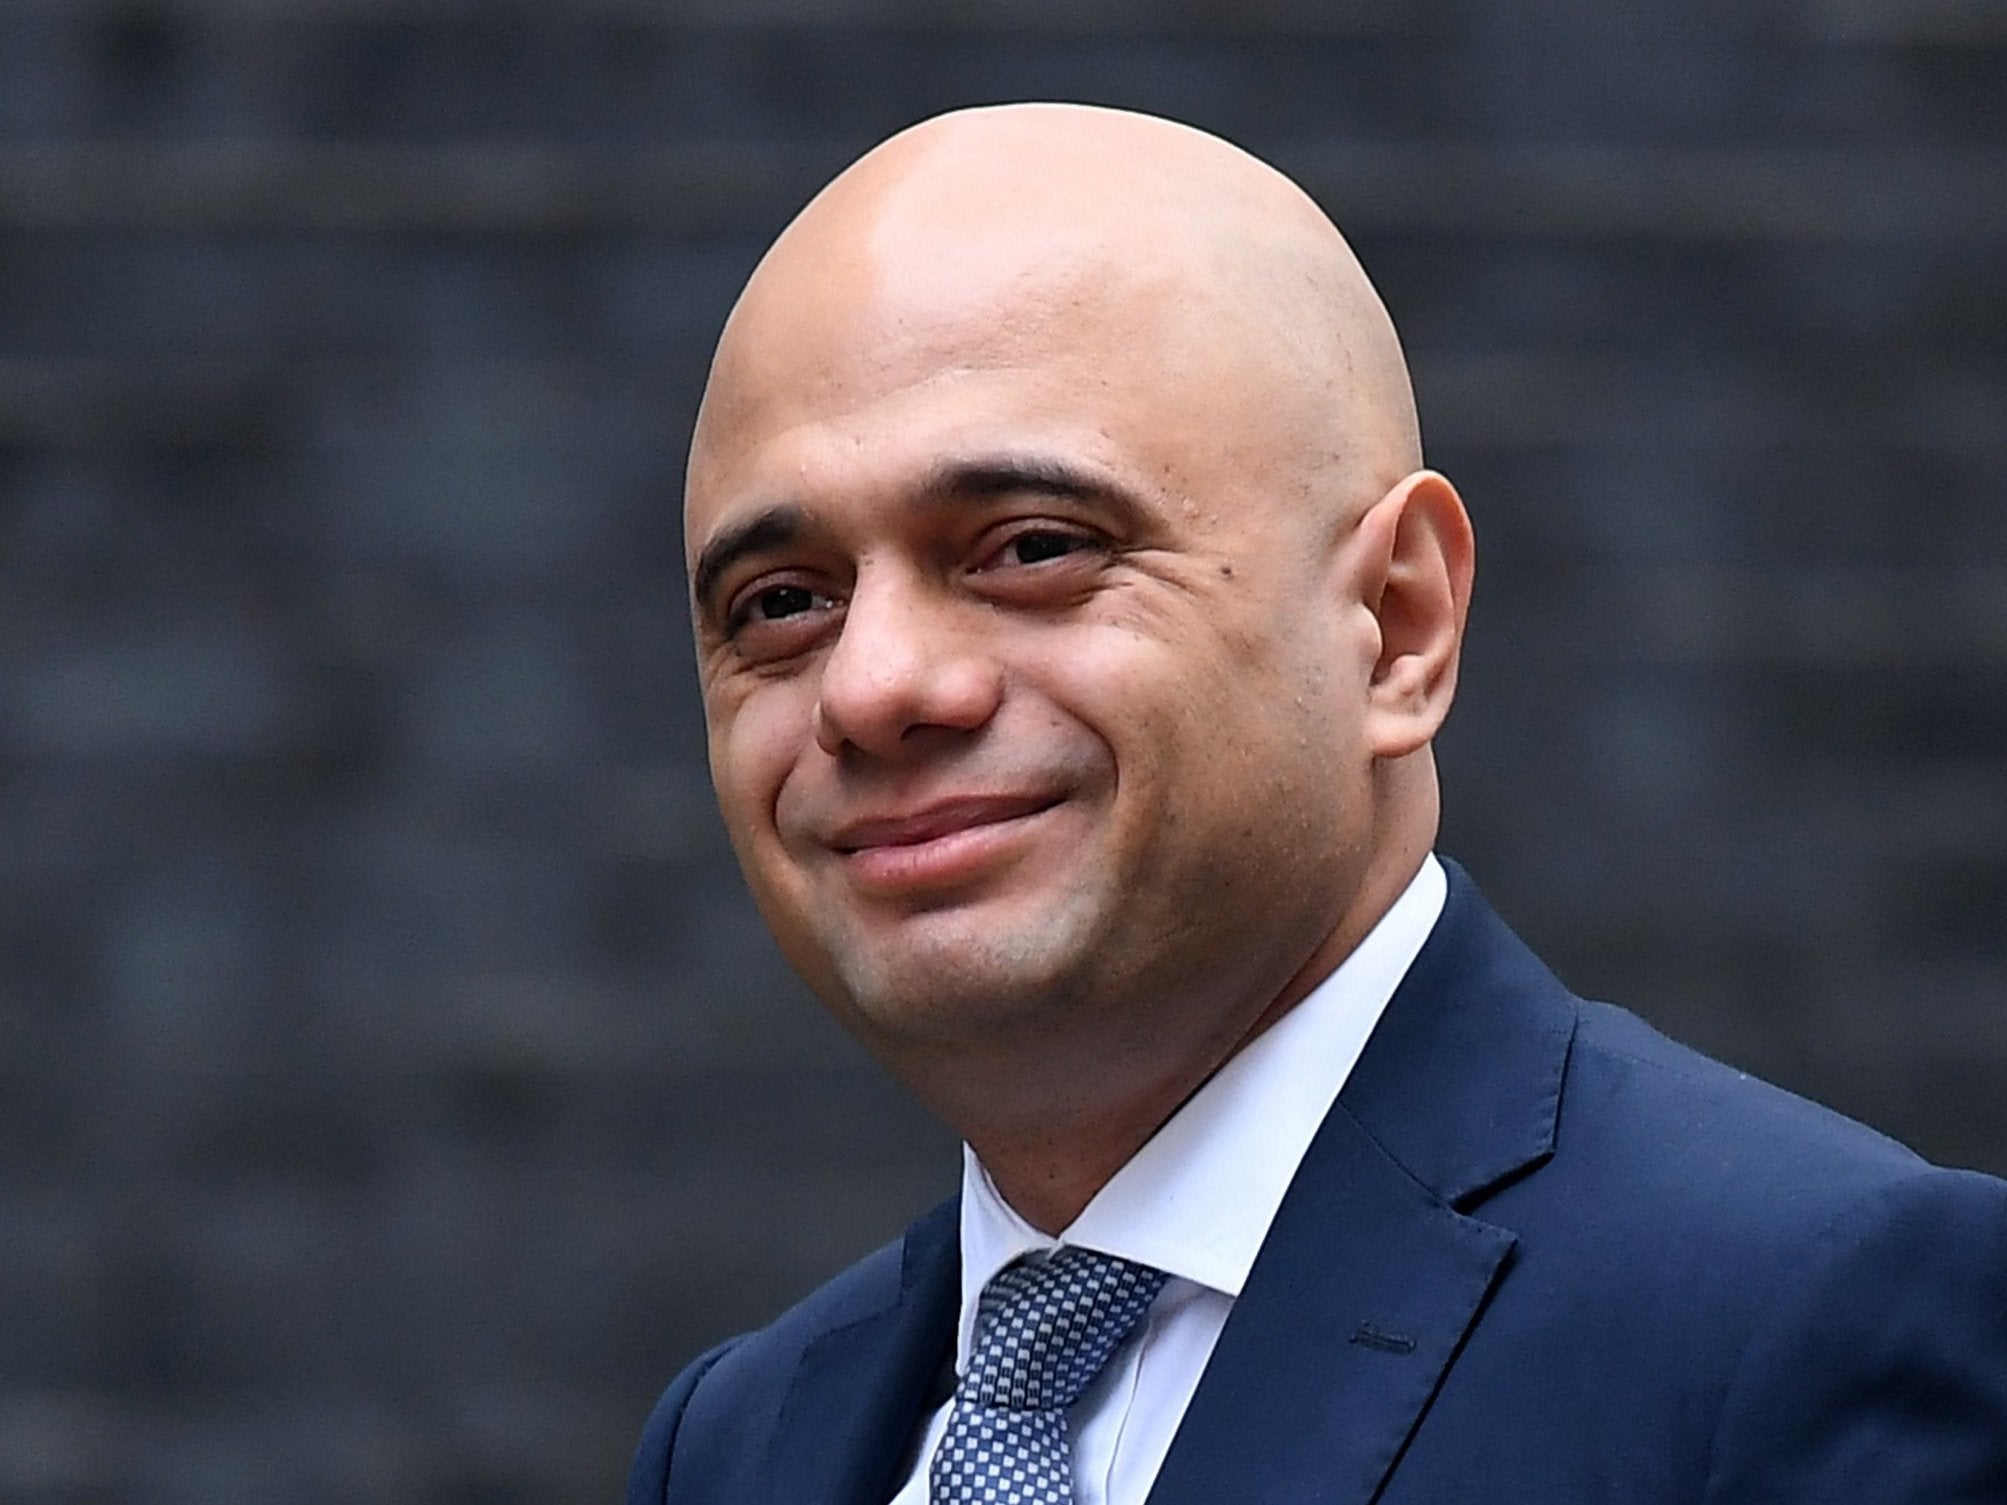 Sajid Javid said he would launch a public consultation on the rifle issue